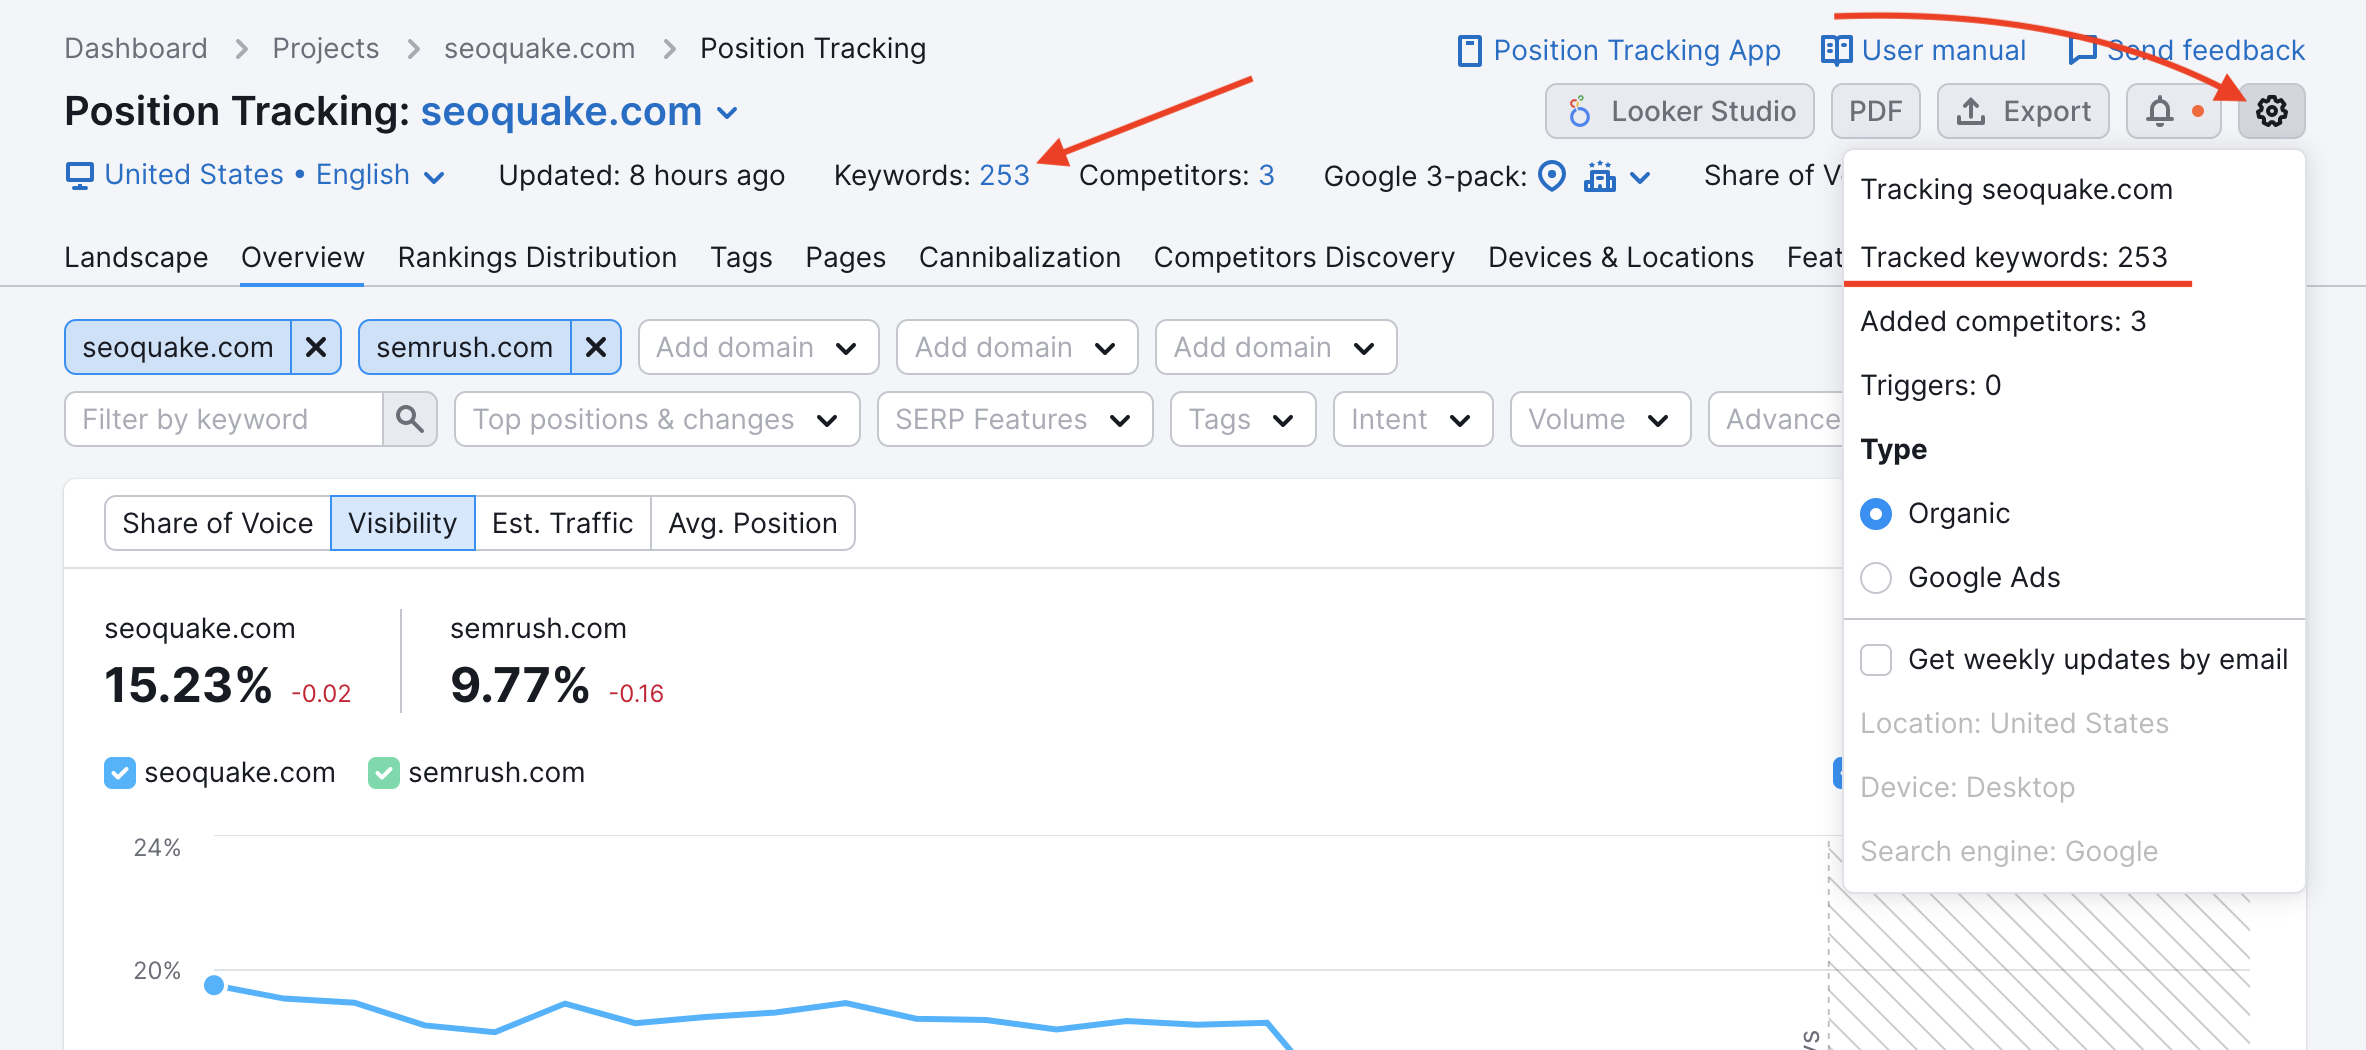 Editing keywords in Position Tracking